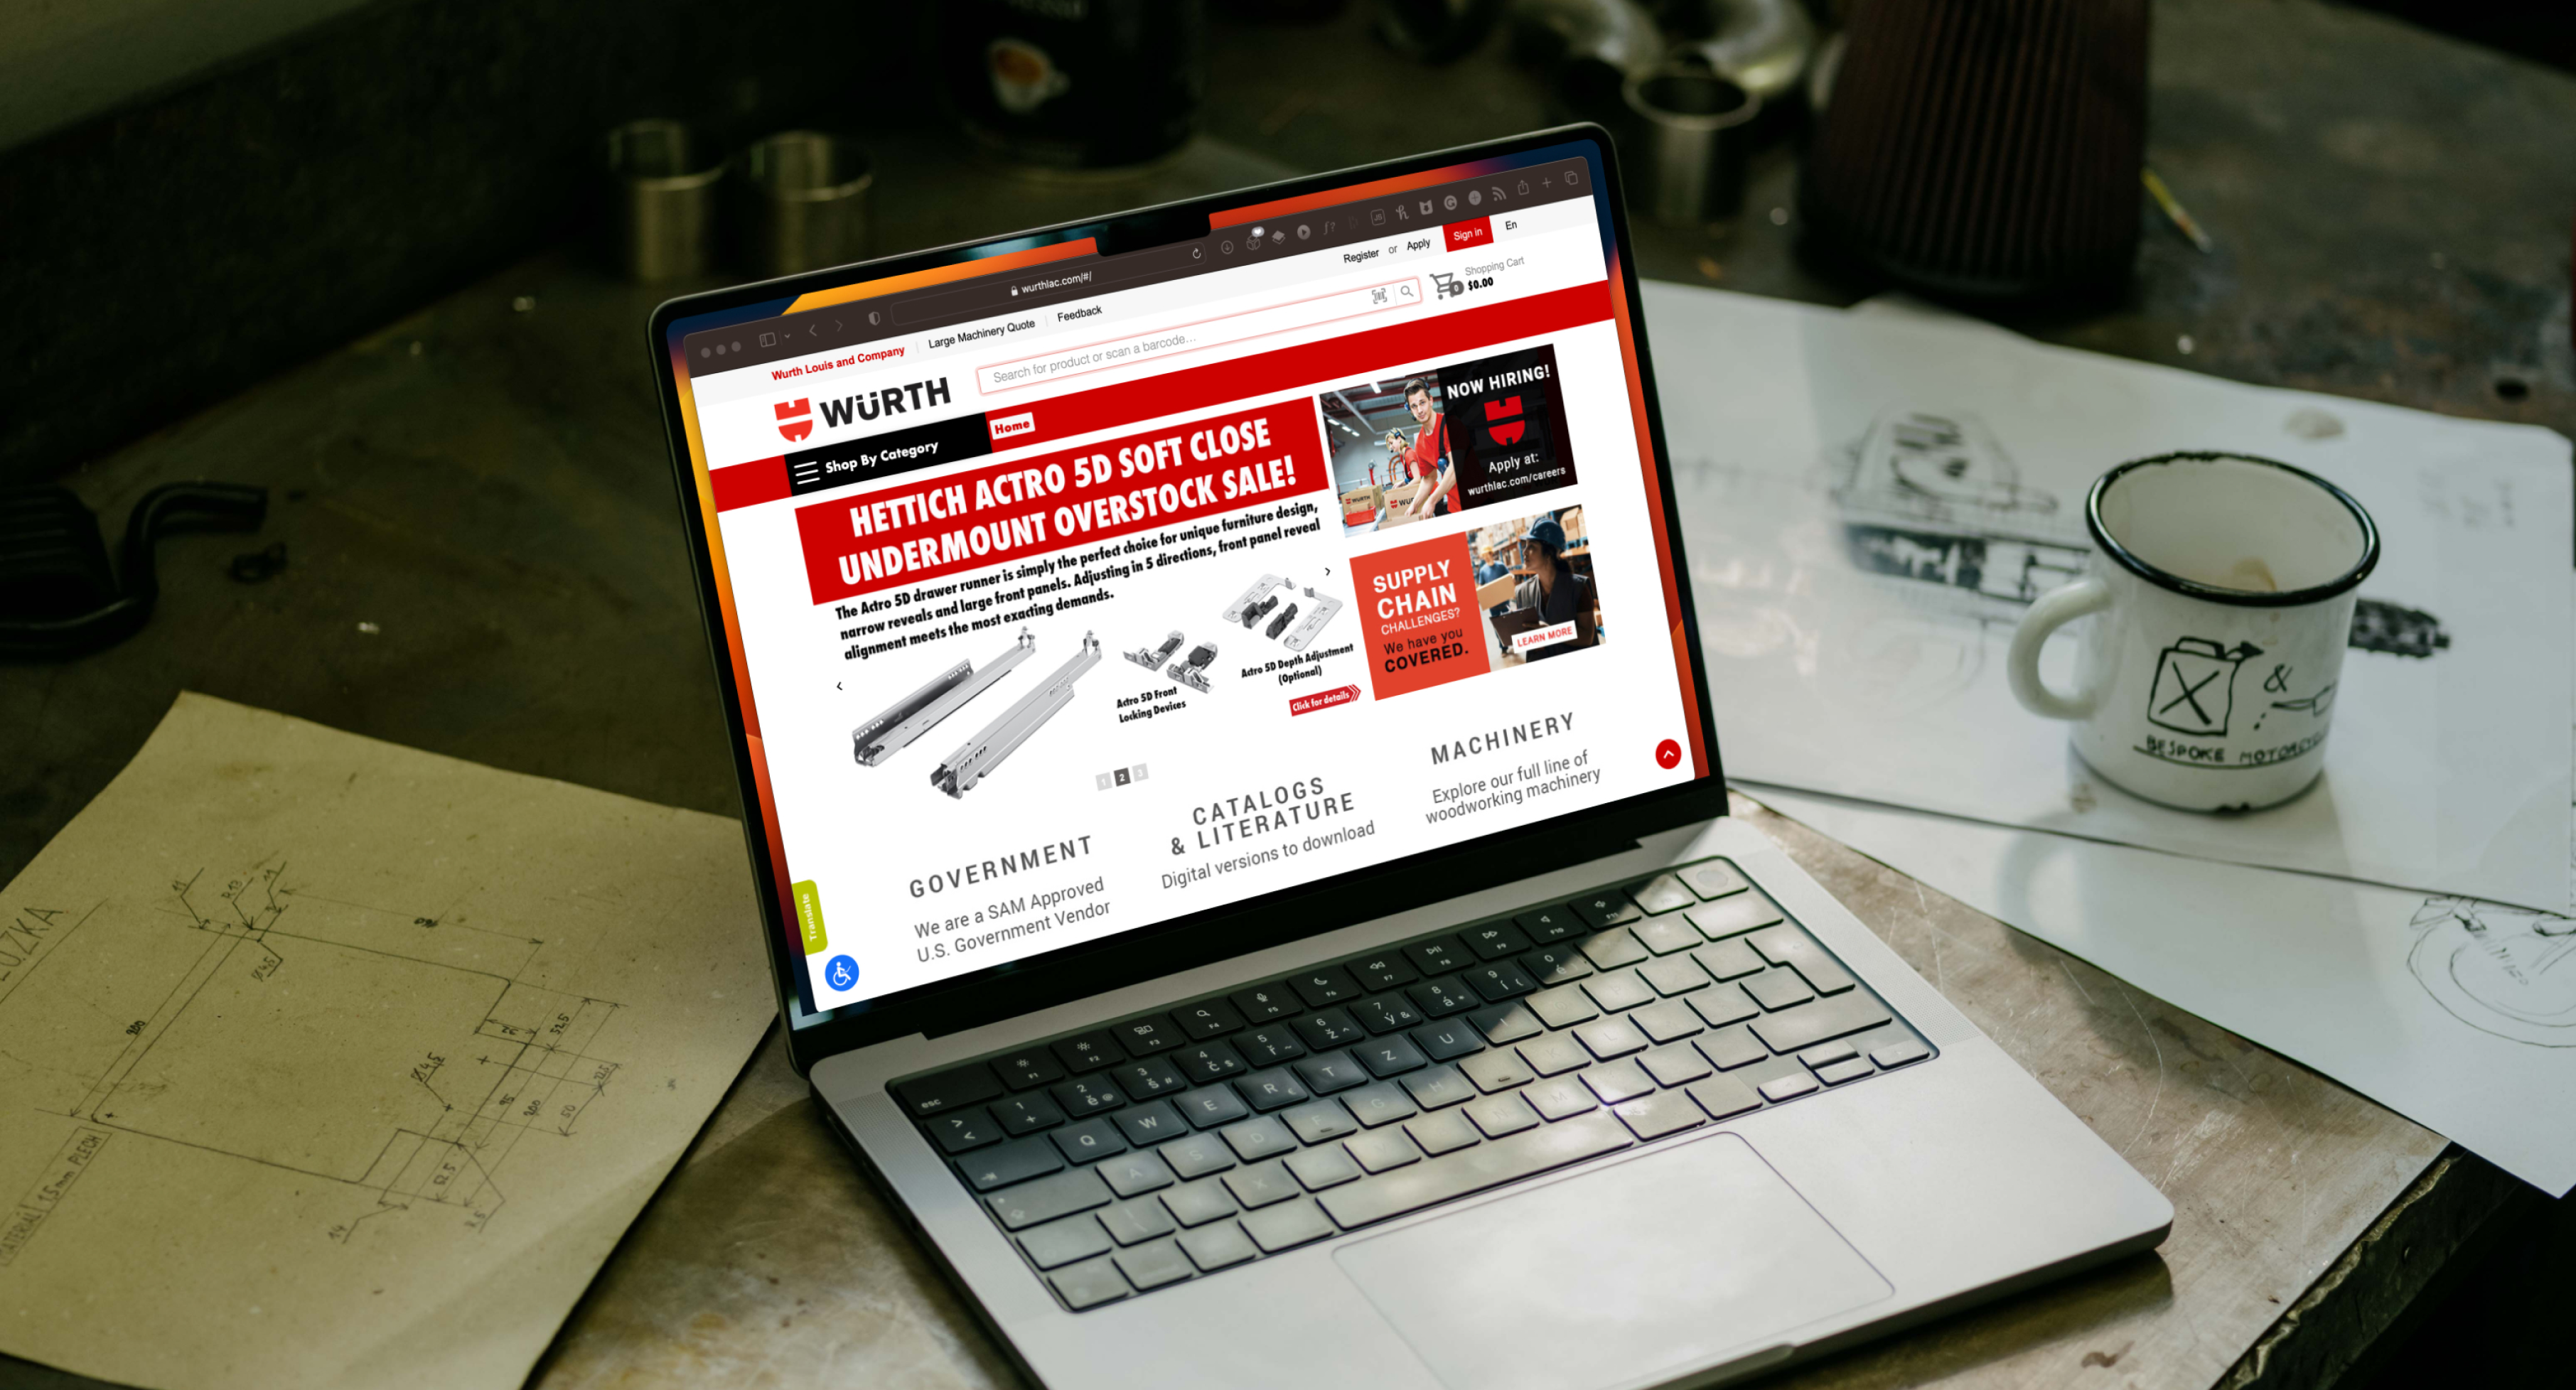 A laptop on a table with the Würth site open in the browser